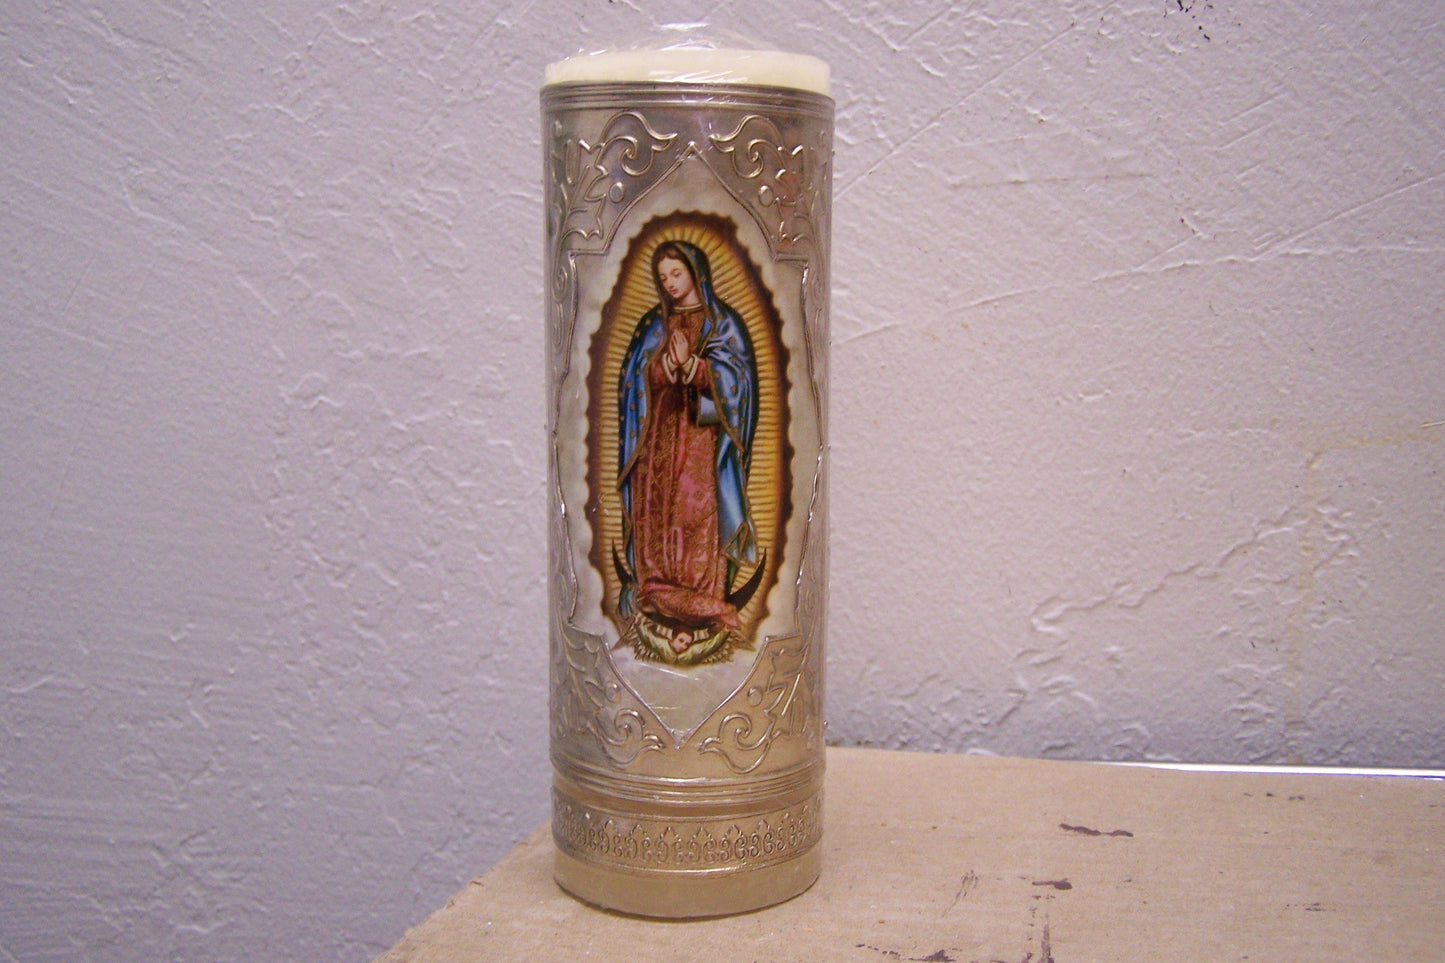 Virgin of Guadalupe 6" Votive Candle with Metal Repujado/Repoussé Accents